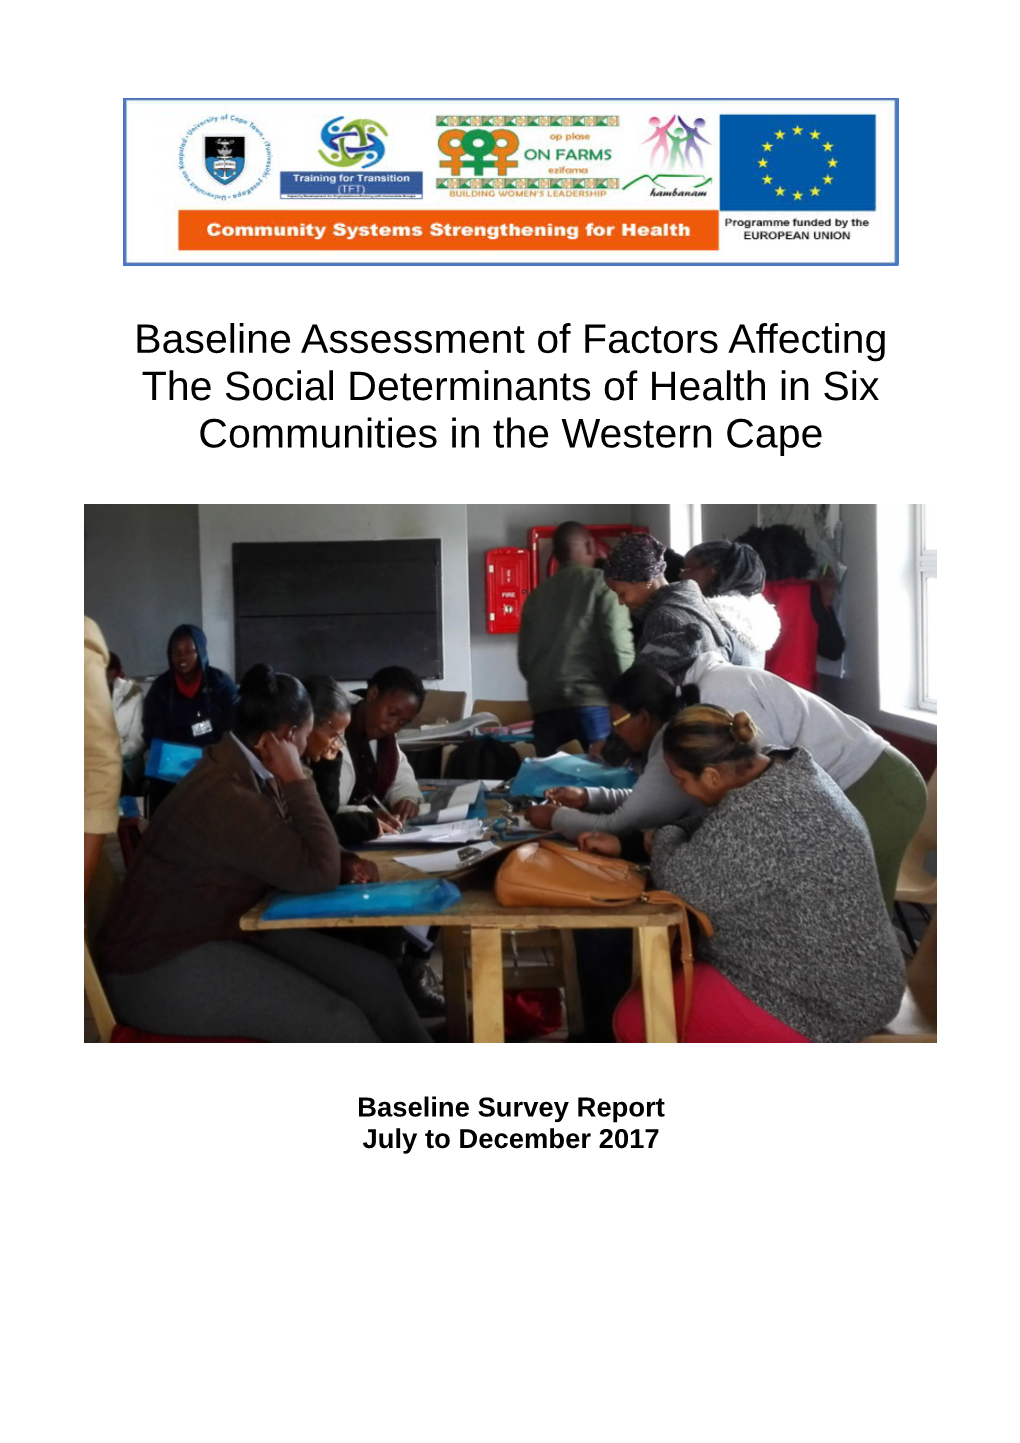 Baseline Assessment of Factors Affecting the Social Determinants of Health in Six Communities in the Western Cape